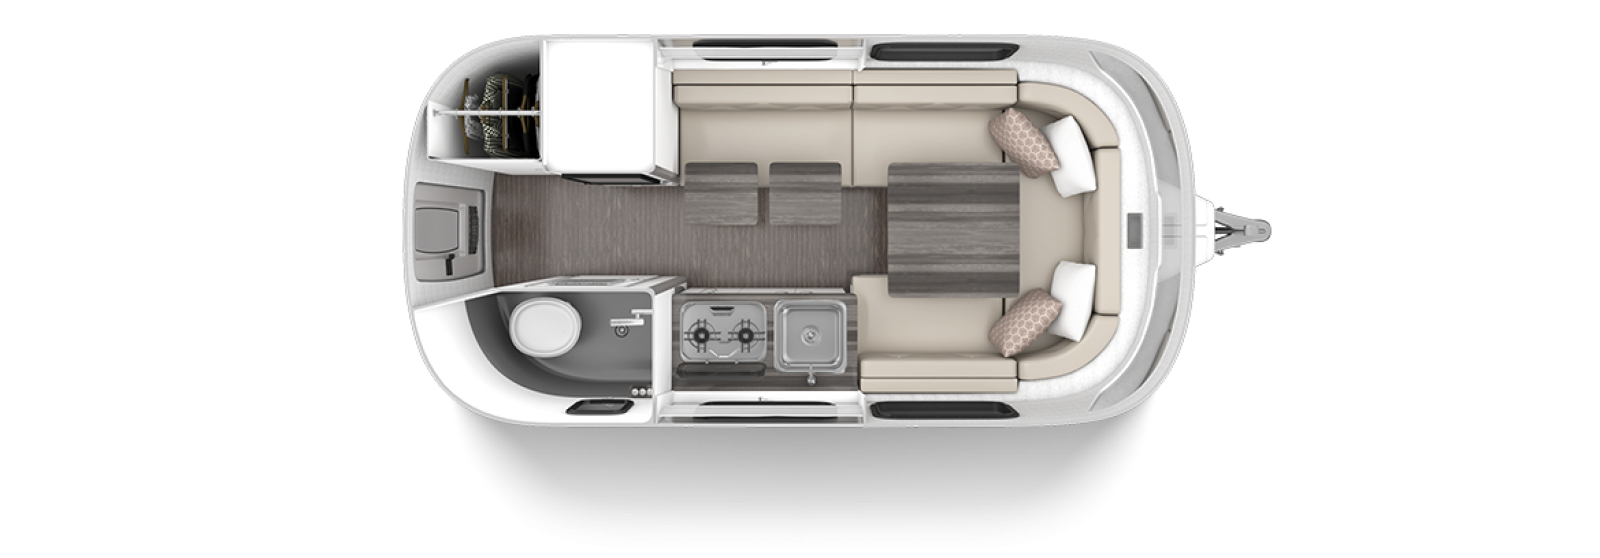 Nest by Airstream 2020 Floor Plan Wingspan White